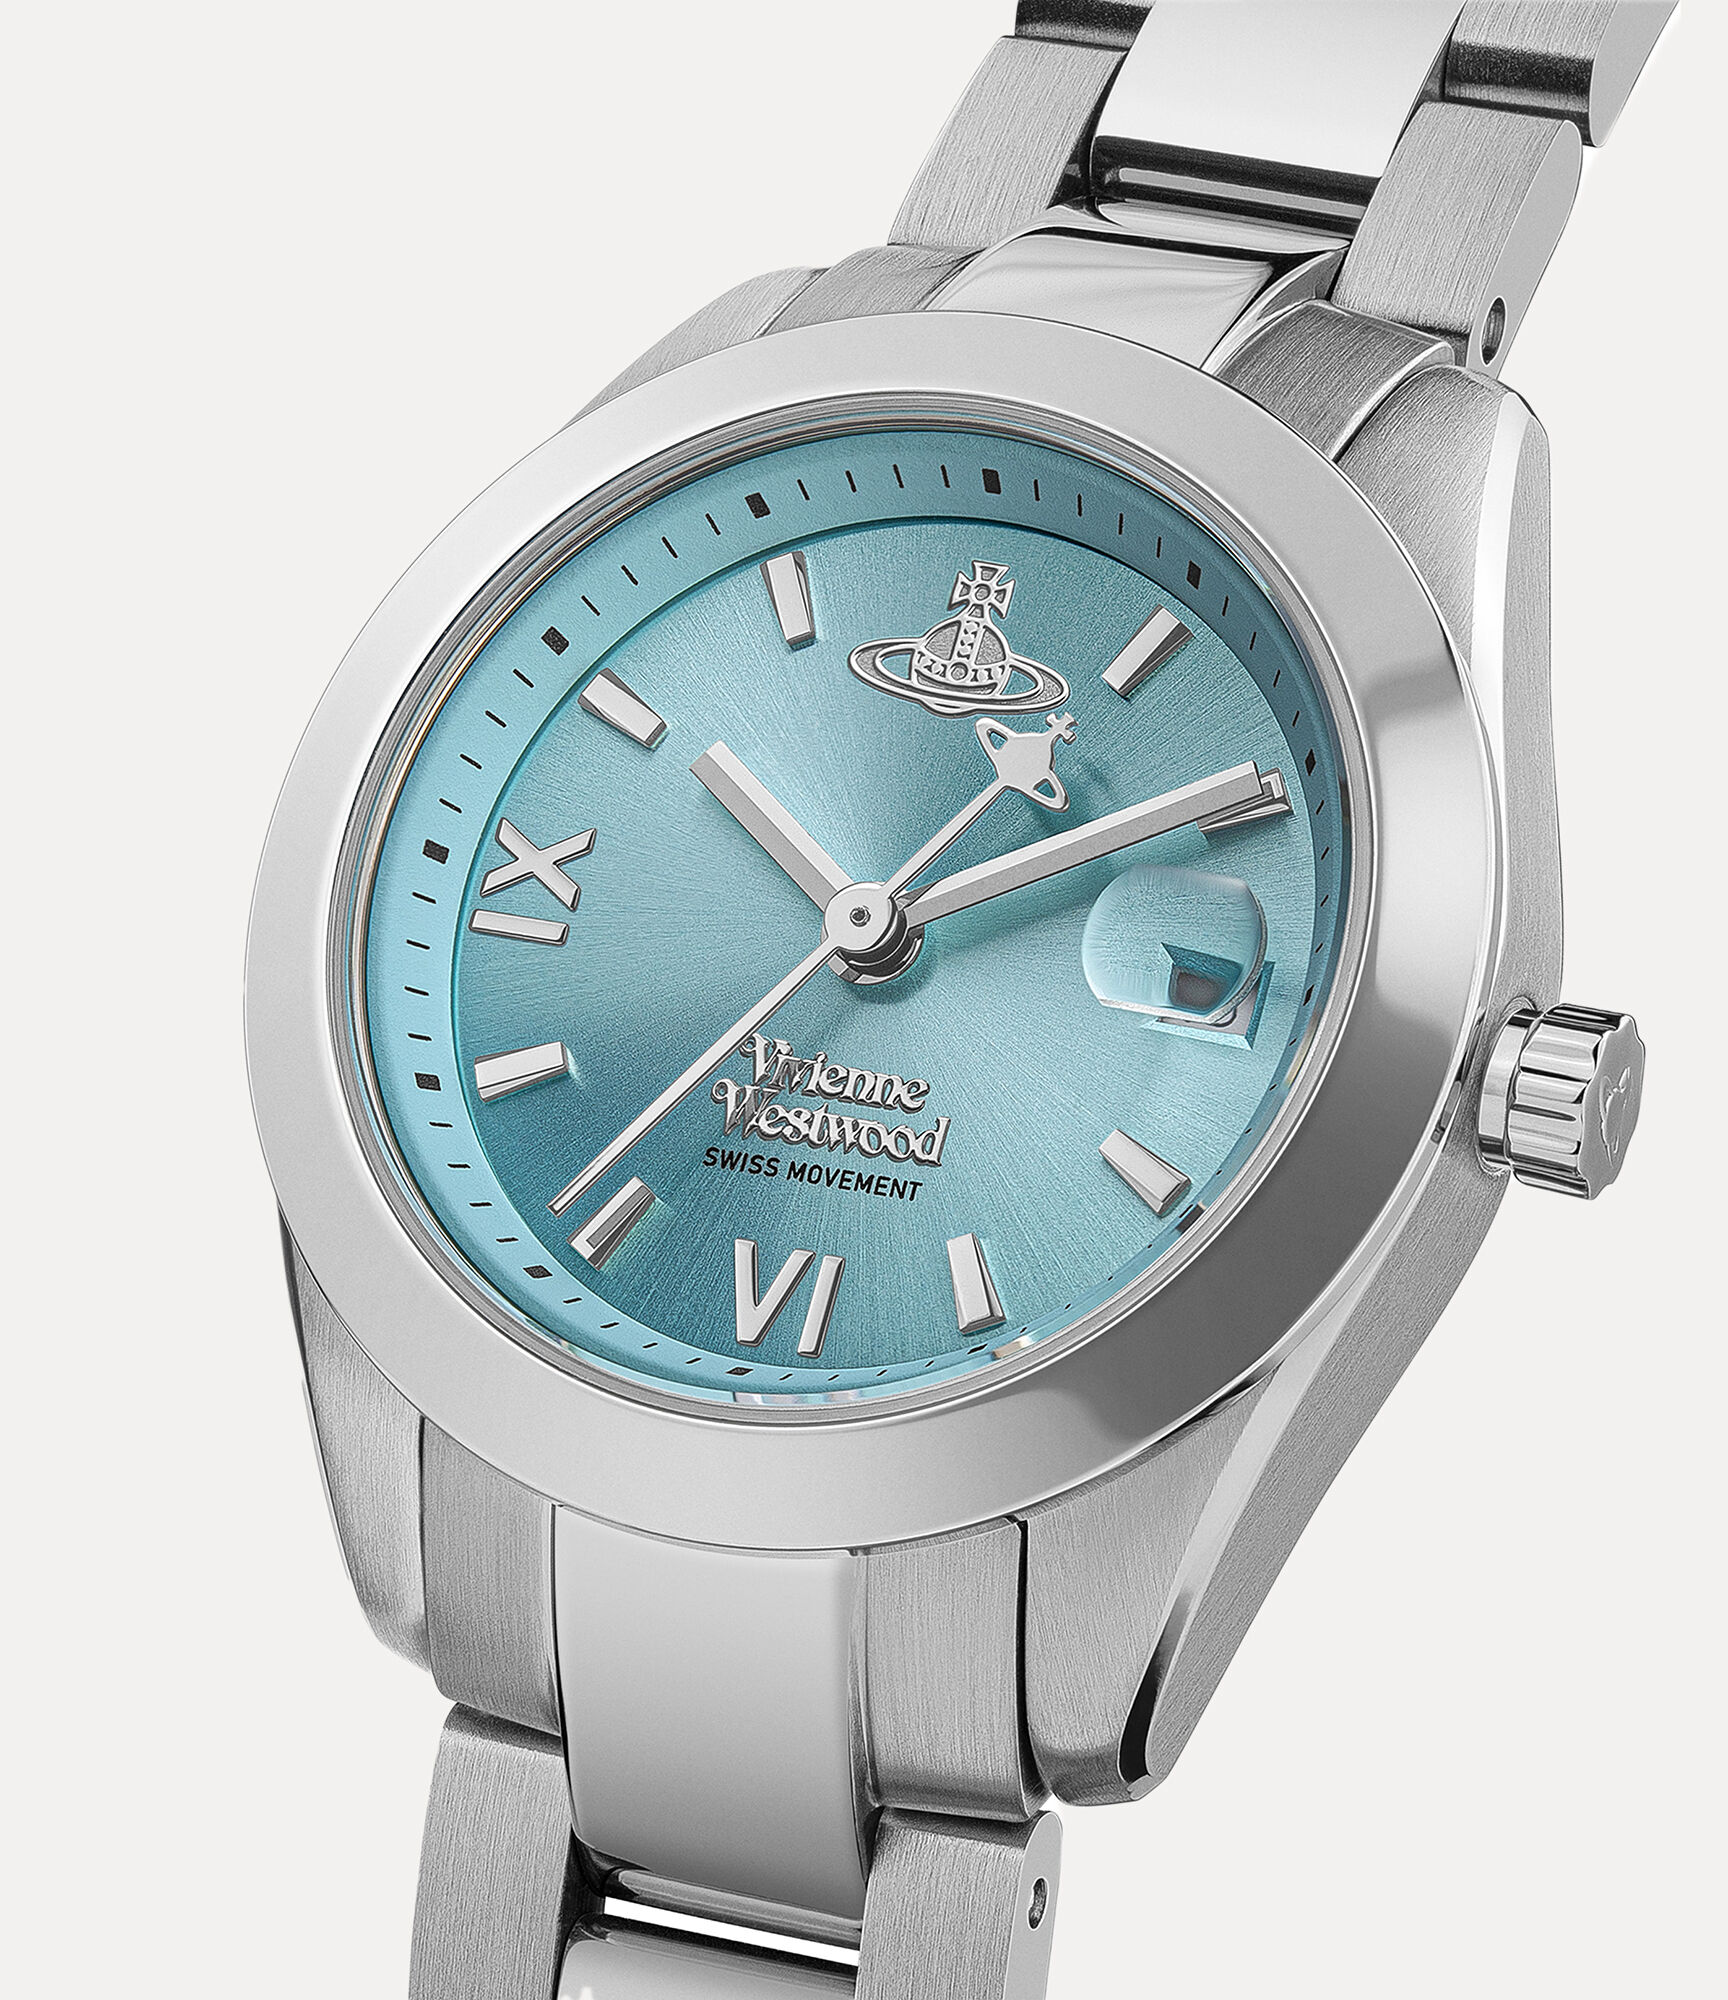 Vivienne Westwood Watches **SALE** 50% OFF Selected Watches NOW!